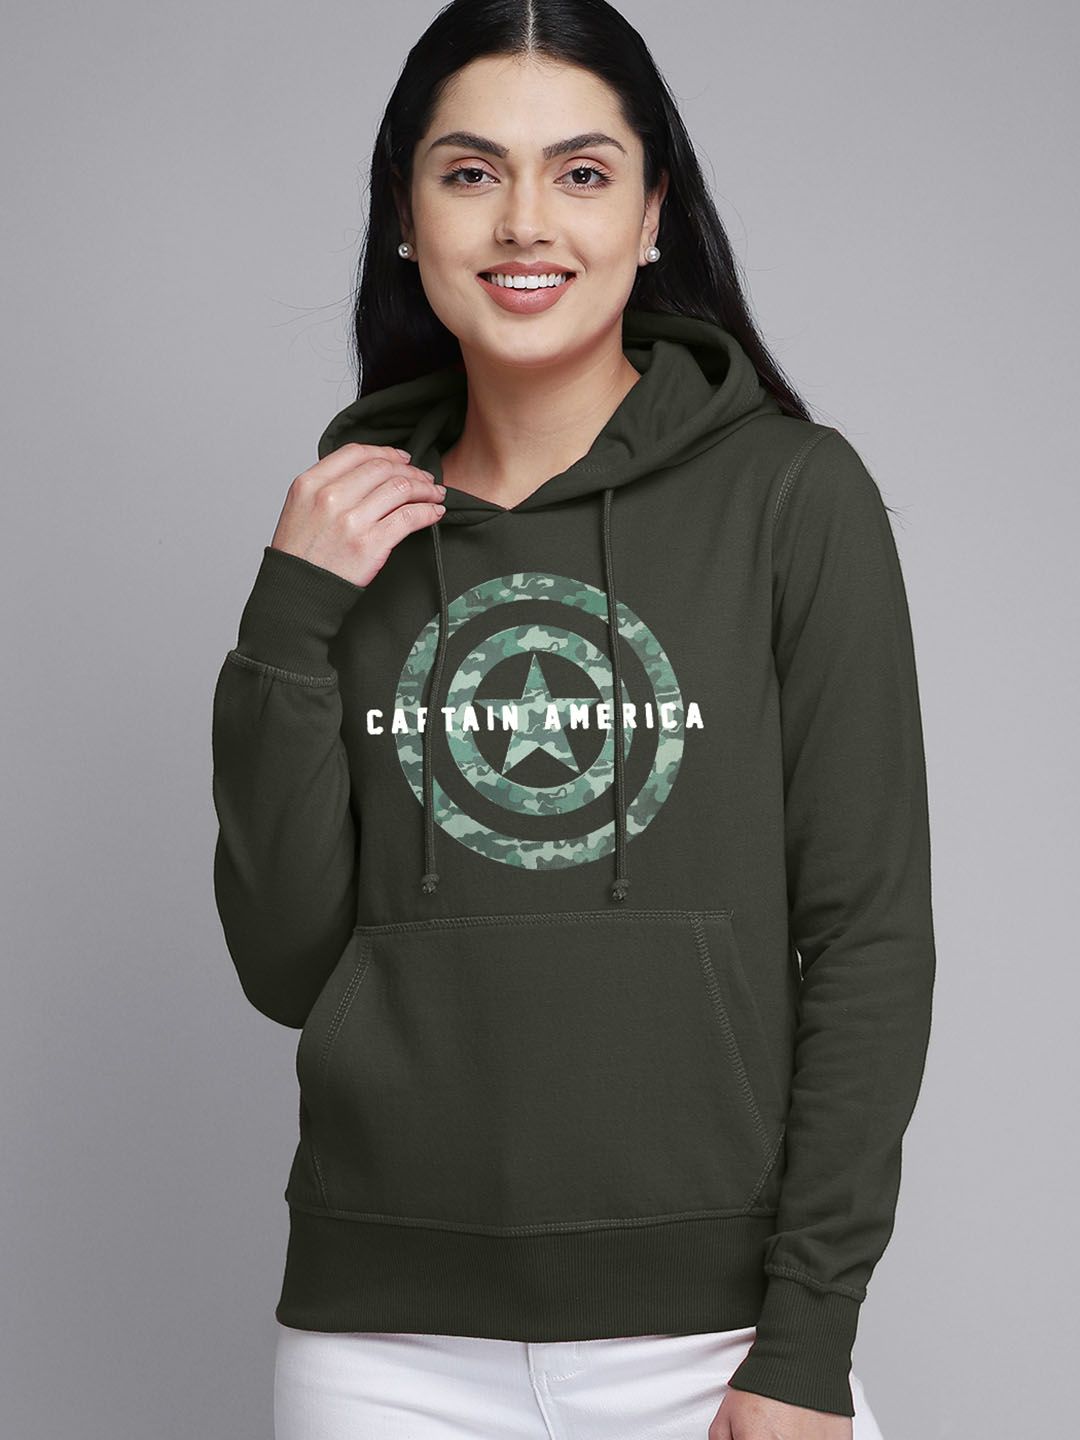 Free Authority Women Olive Green Captain America Printed Hooded Sweatshirt Price in India